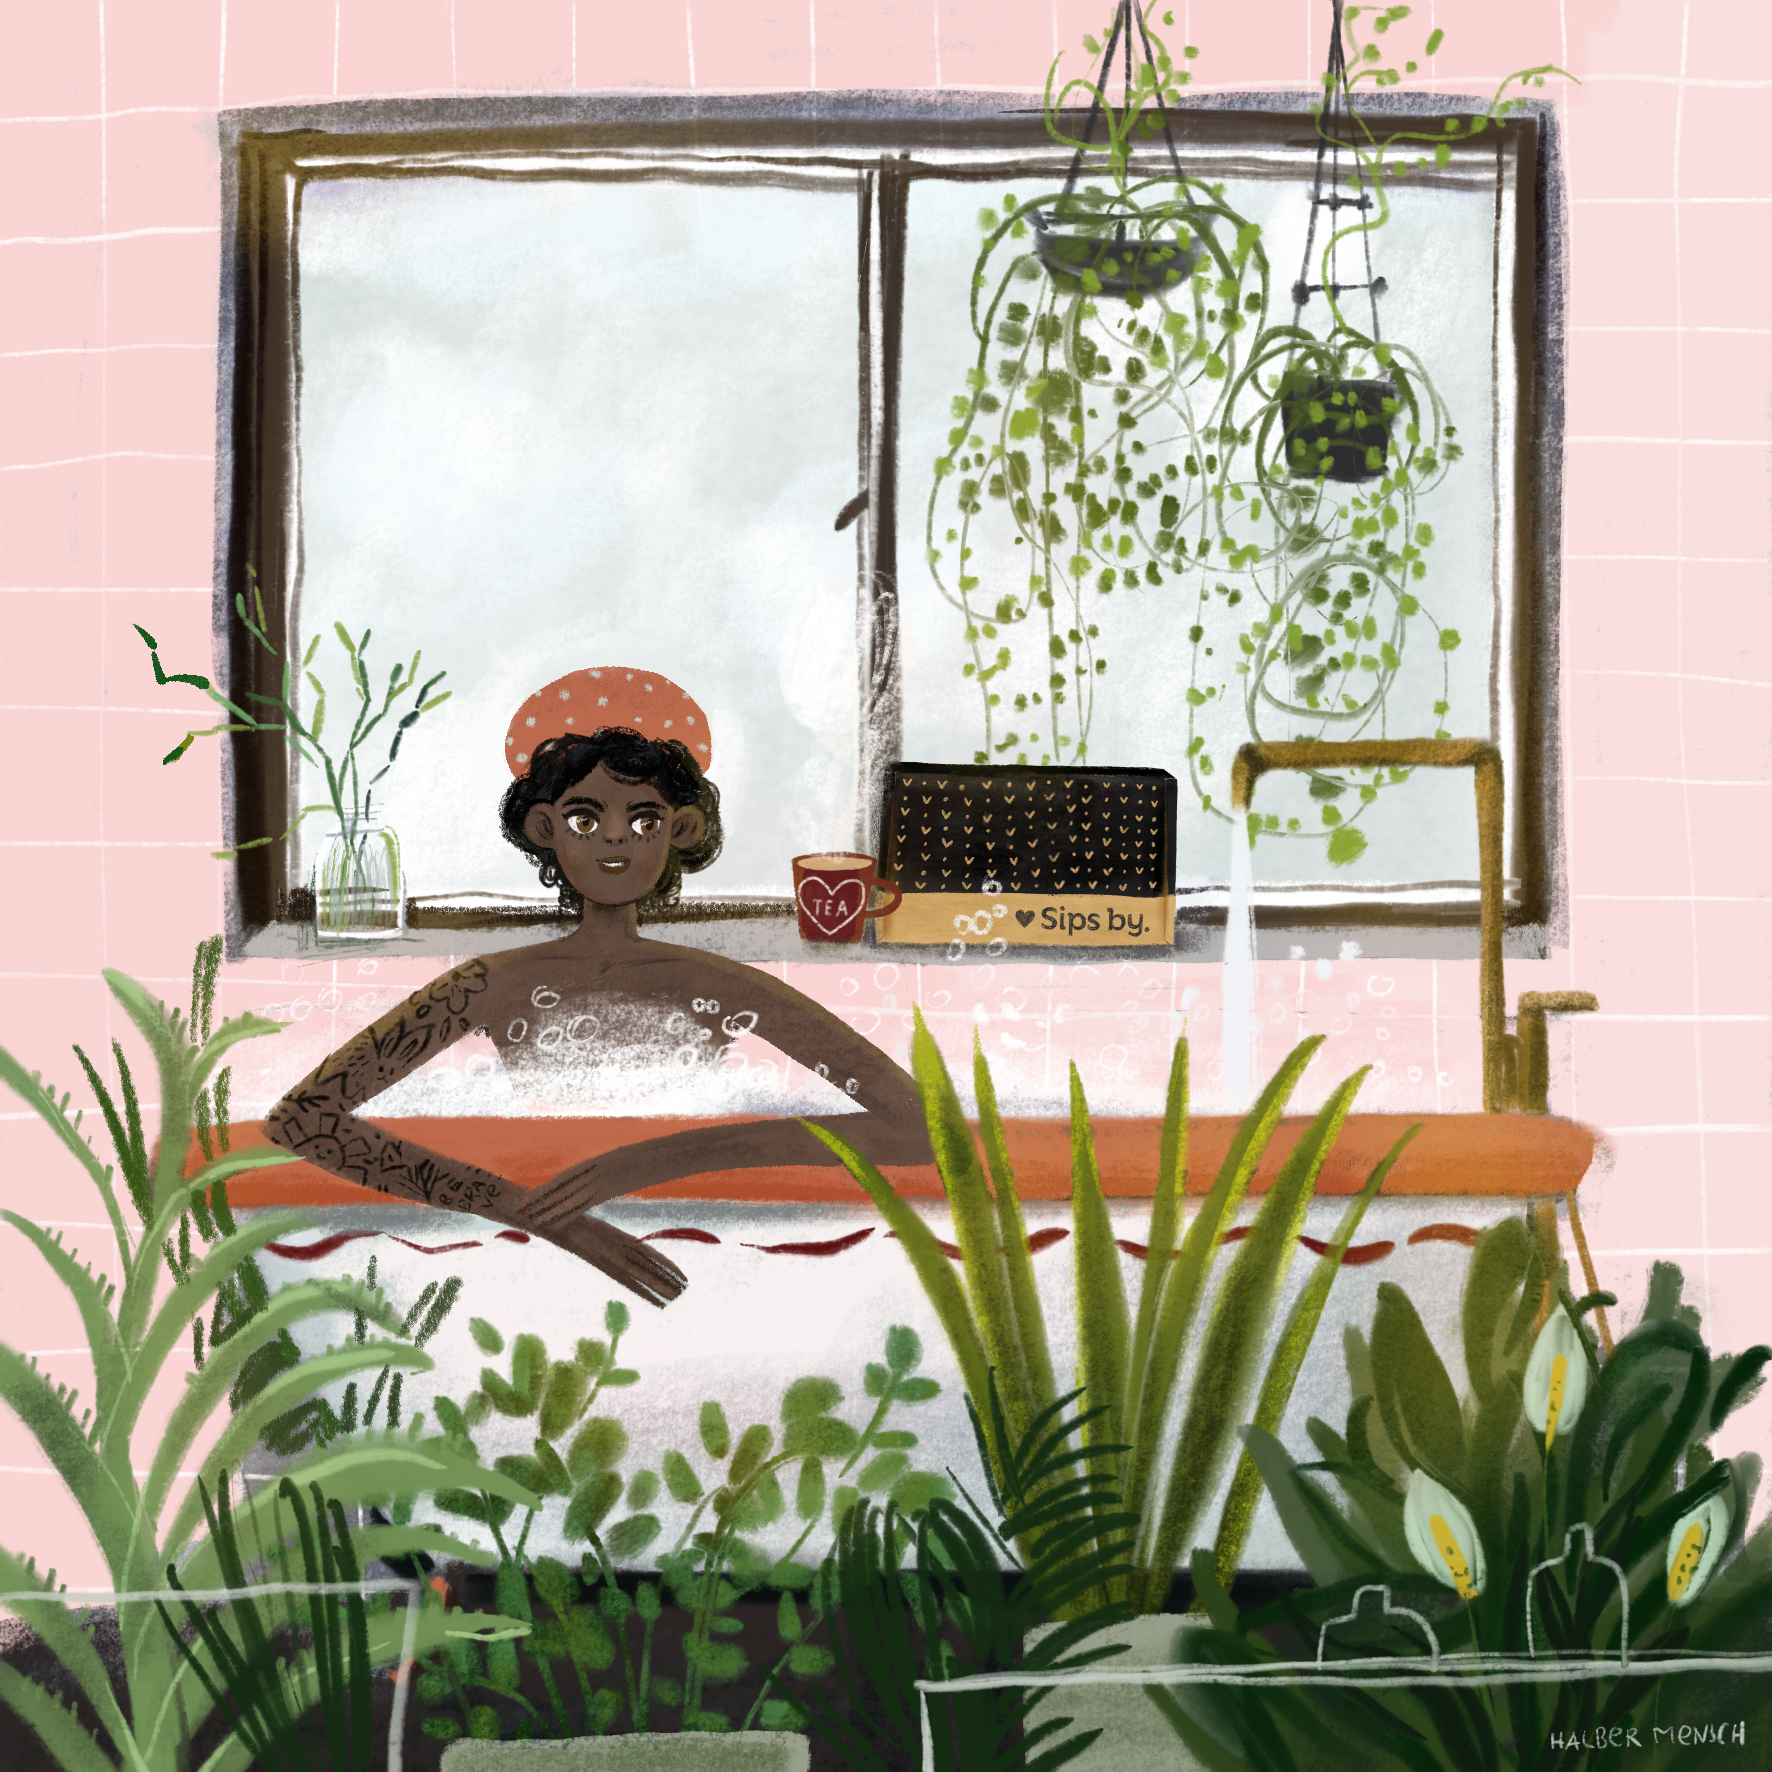 Moment for Mom illustration of person in pink bathroom soaking in a bathtub surrounded by plants and drinking a cup of tea from a Sips by Box